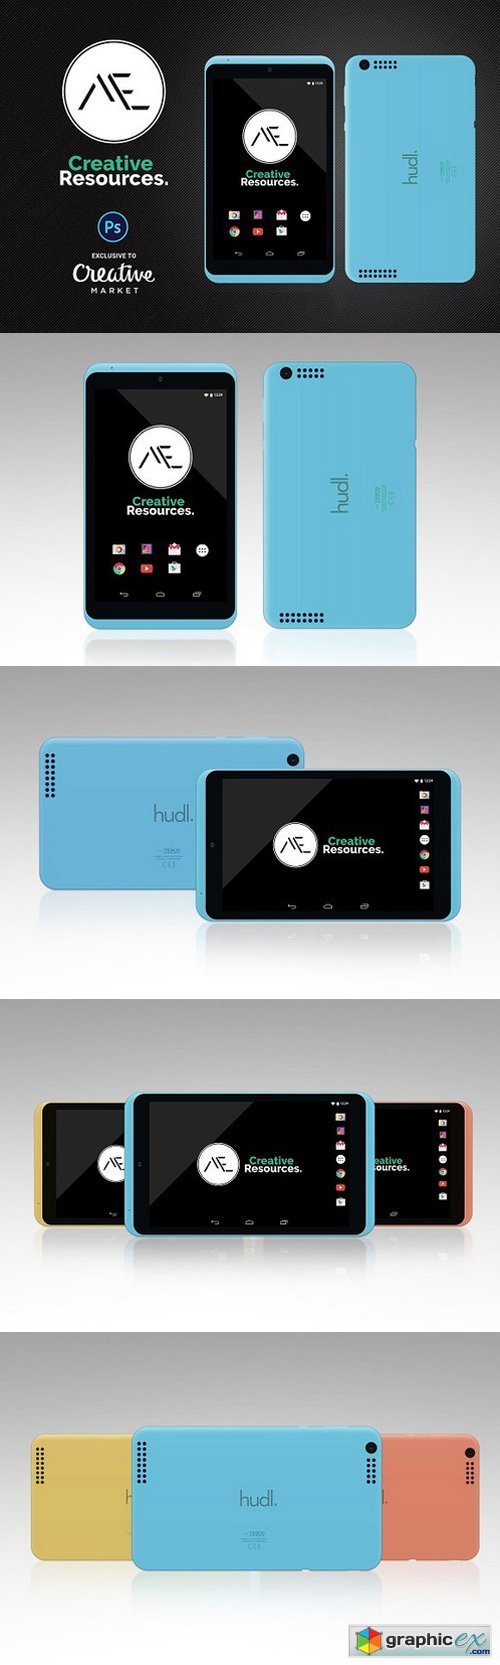 Tesco Hudl 2 Android Tablet